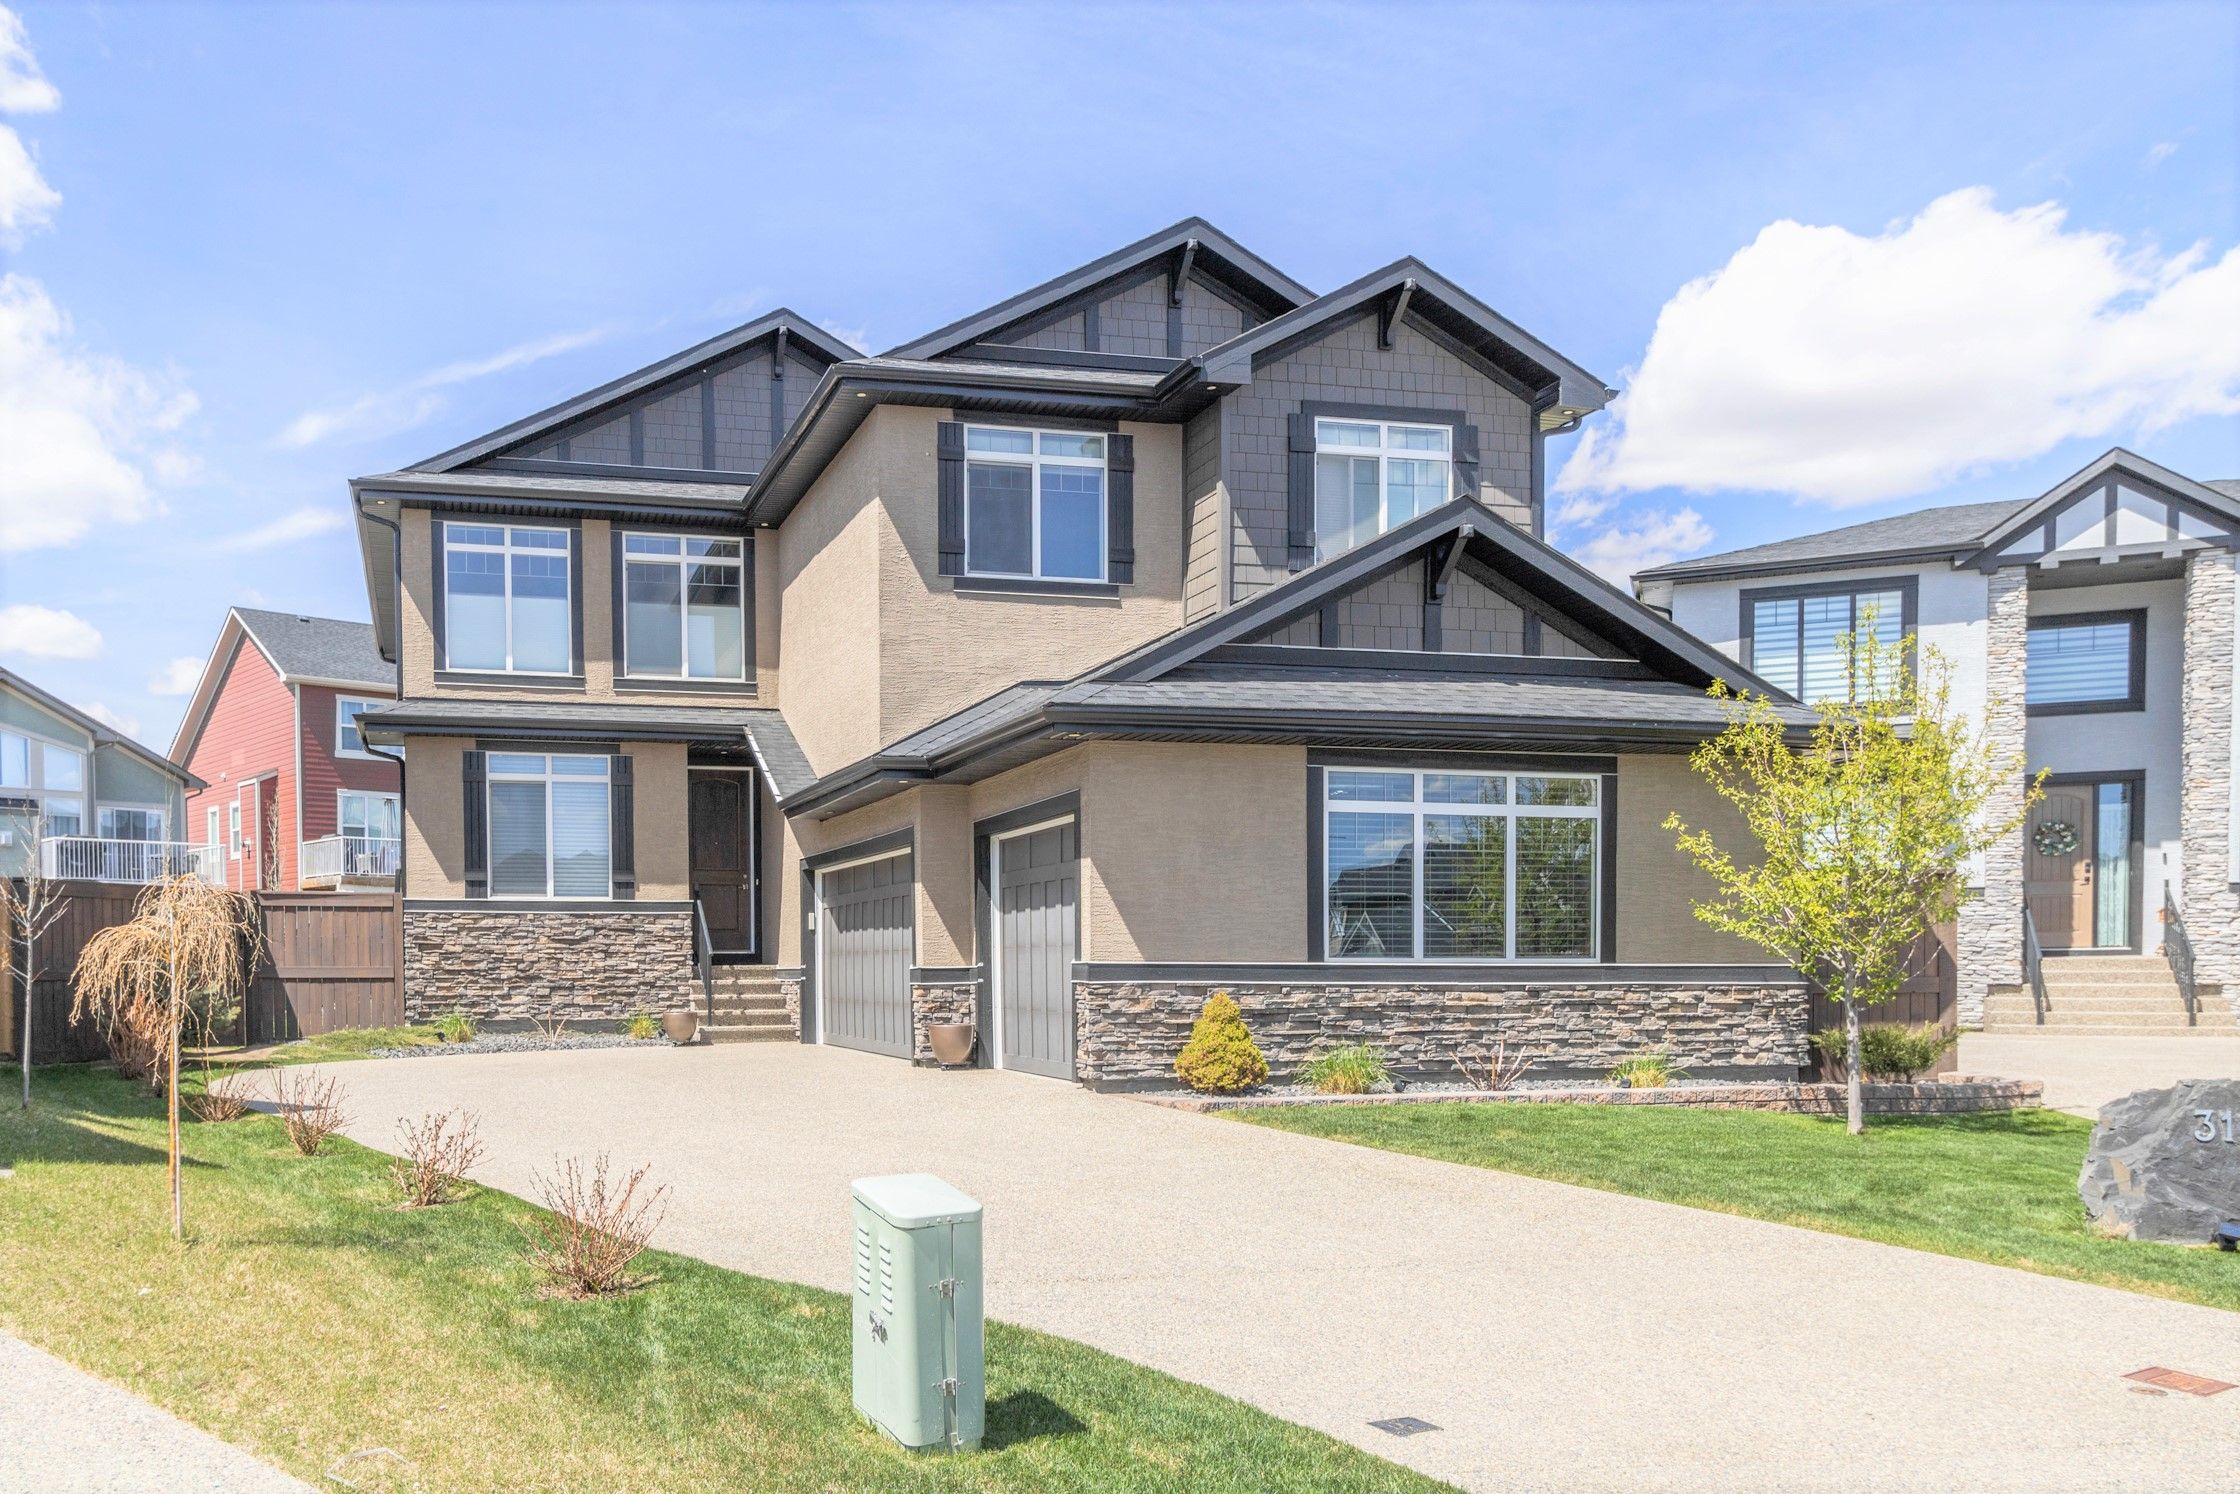 Chestermere MLS $800,000 to 1 million